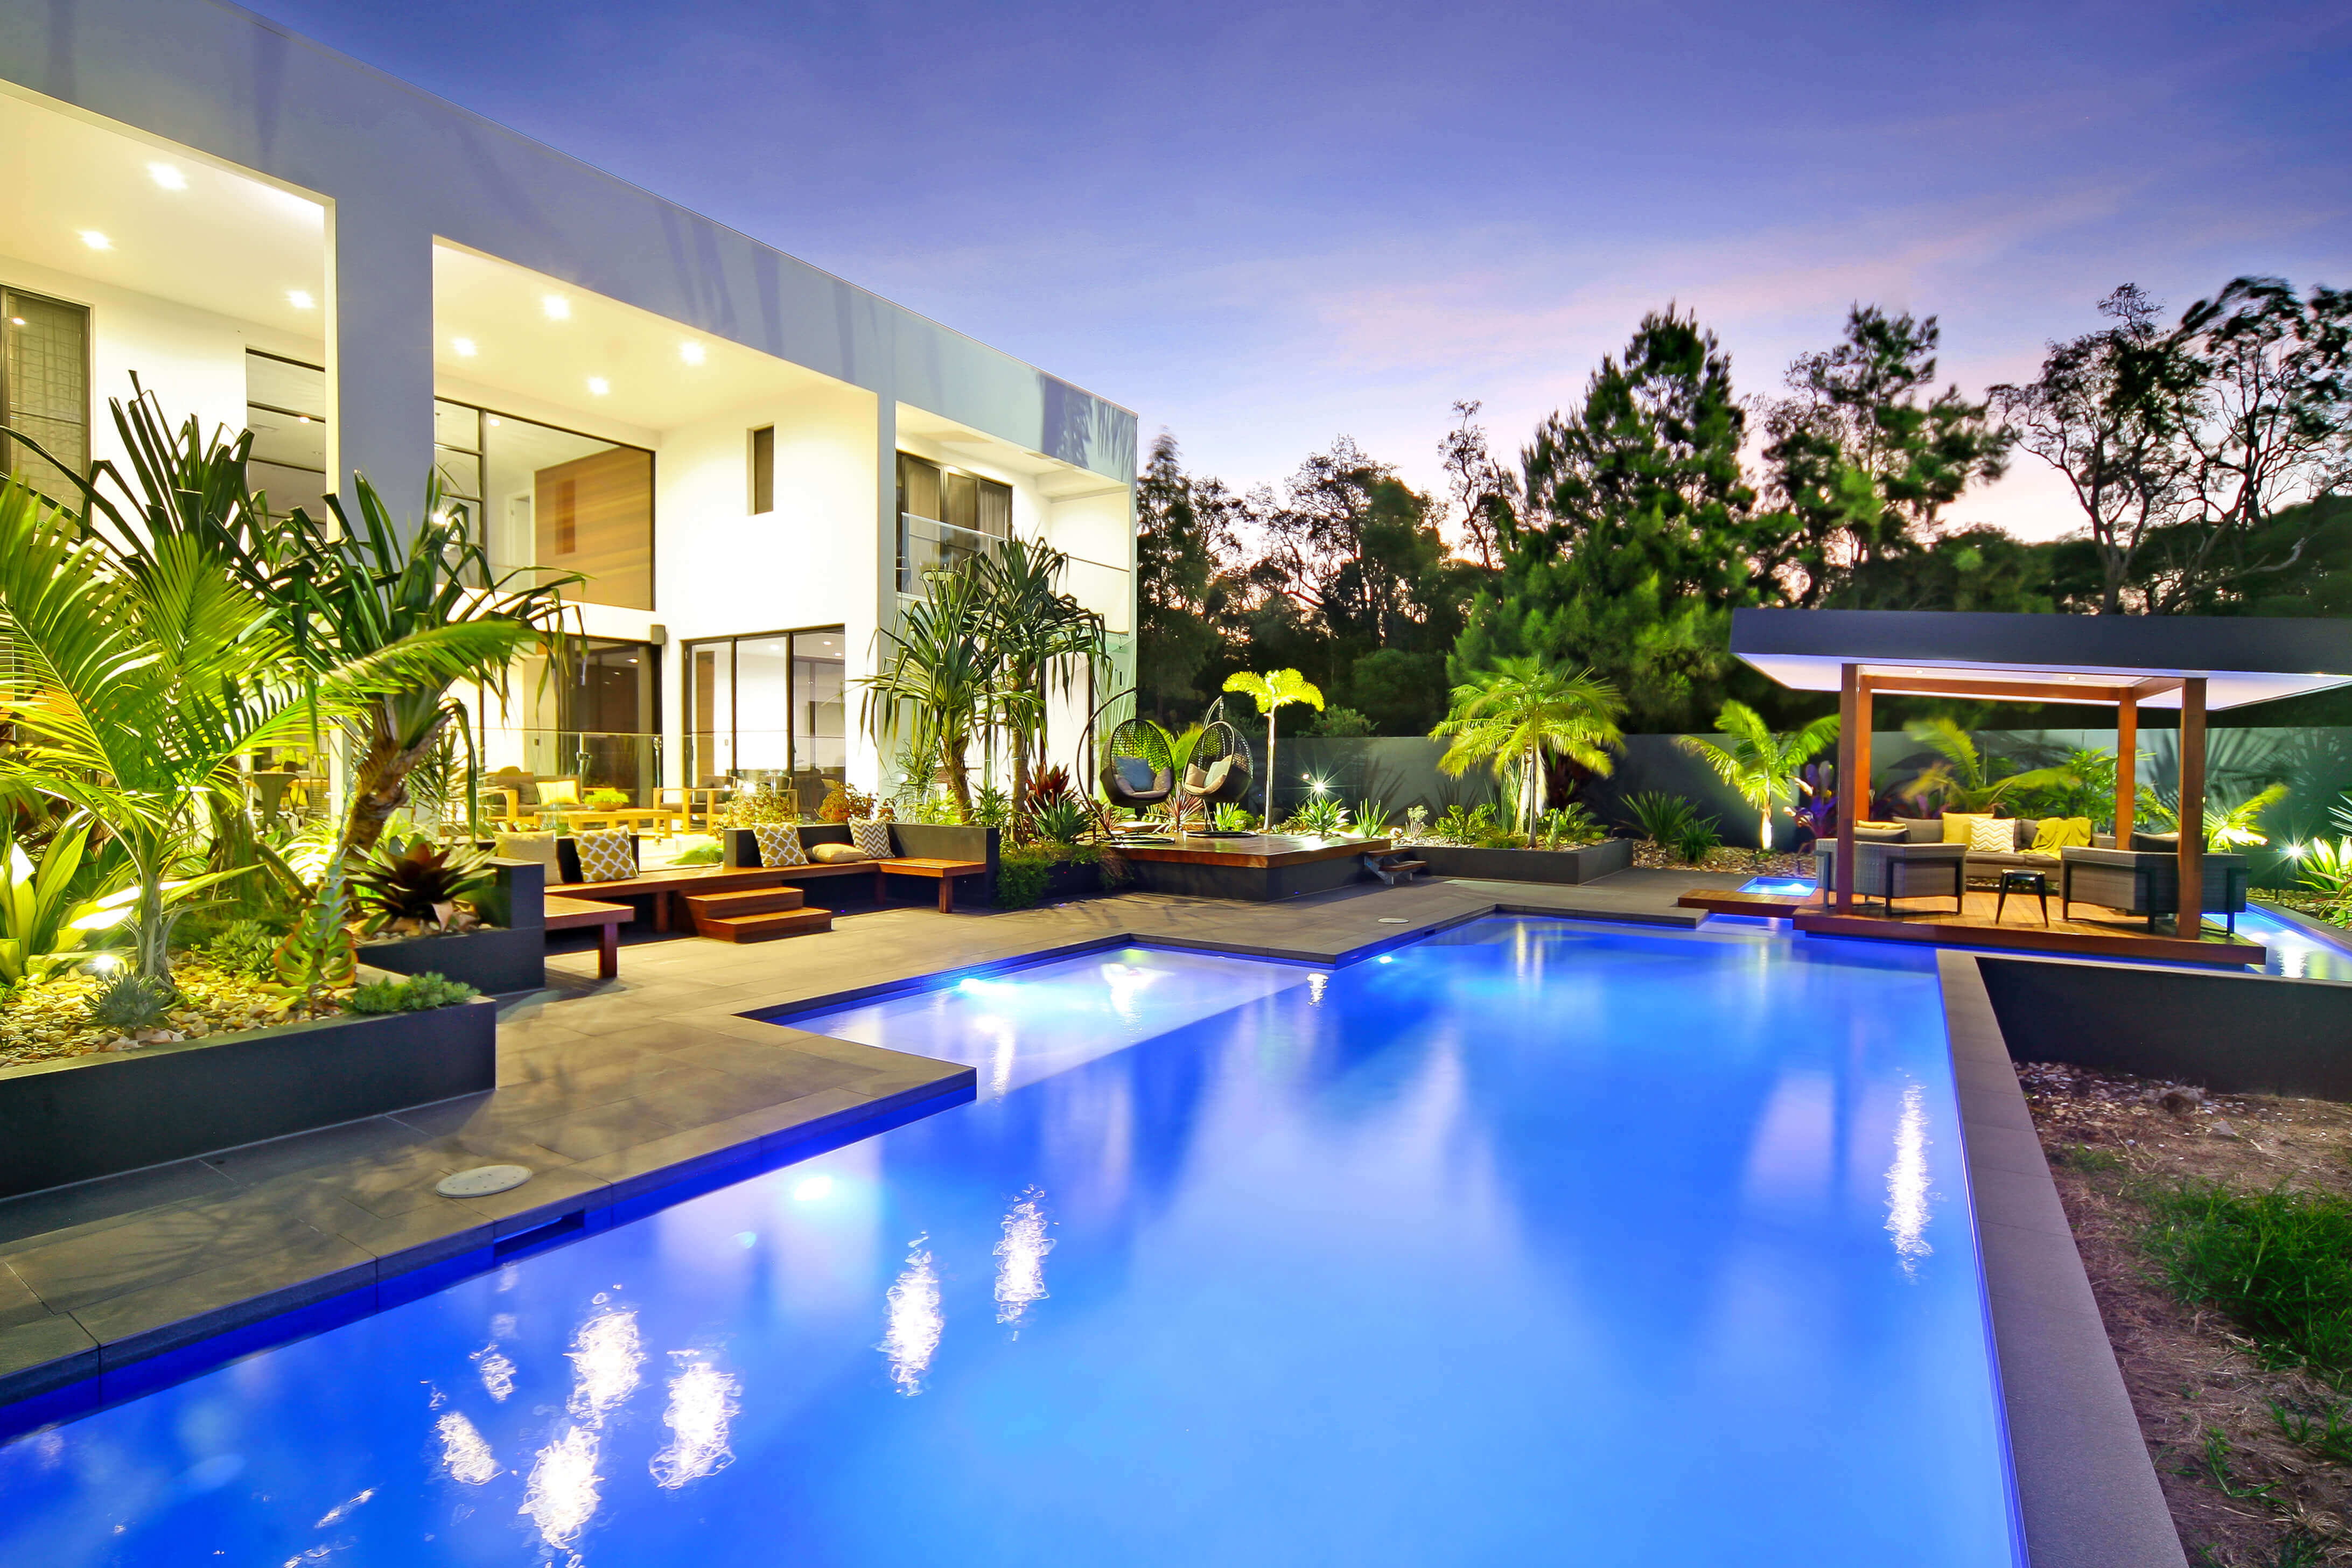 Unique Pools And Landscape Design, Pool And Landscaping Packages Brisbane